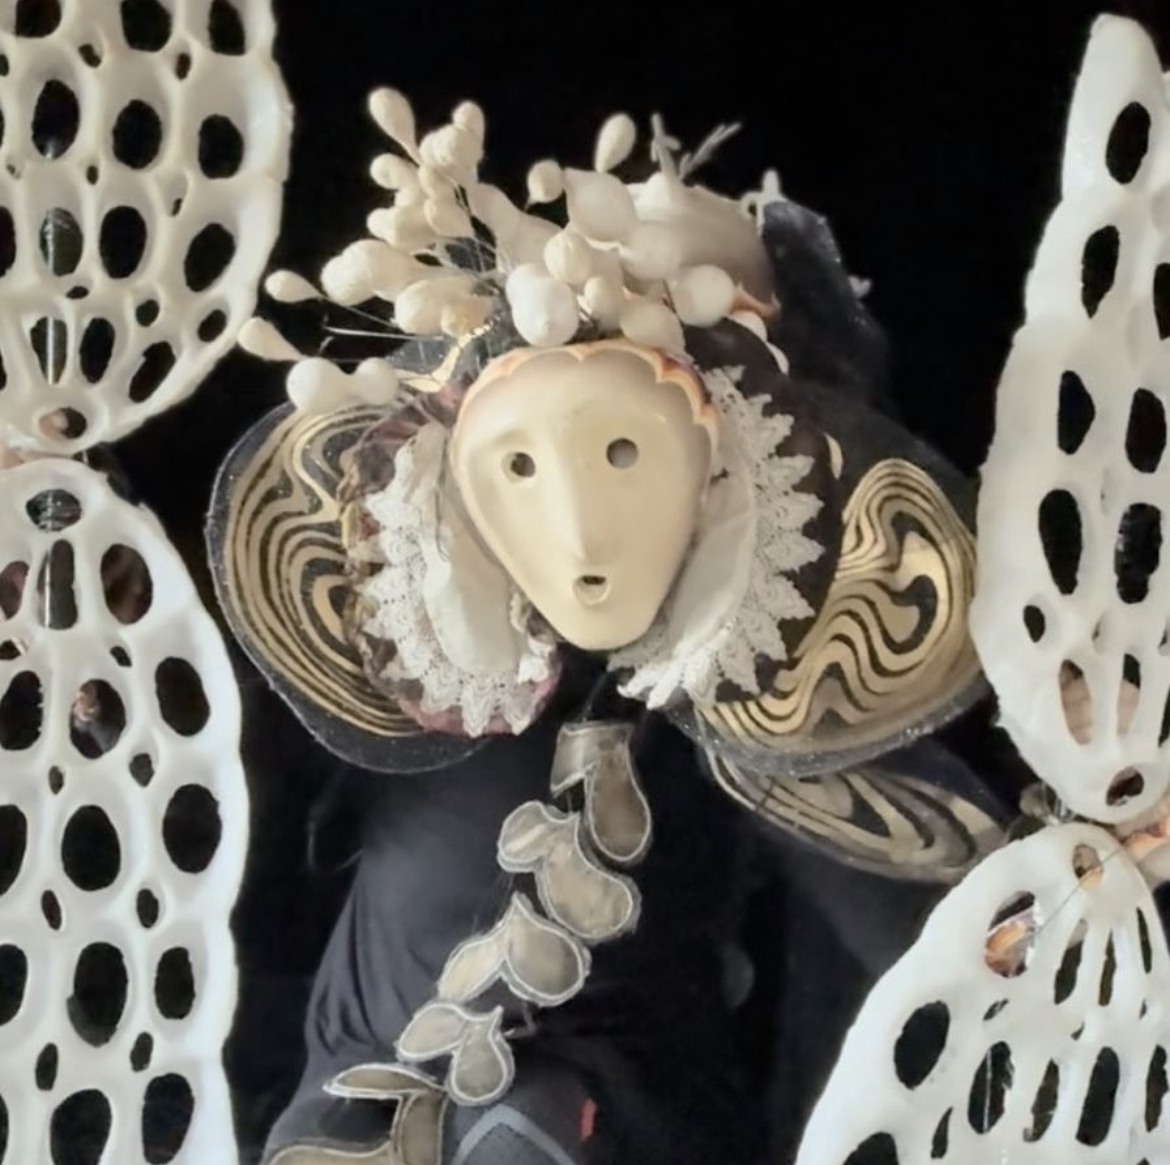 Puppet dressed in multilayered costumes